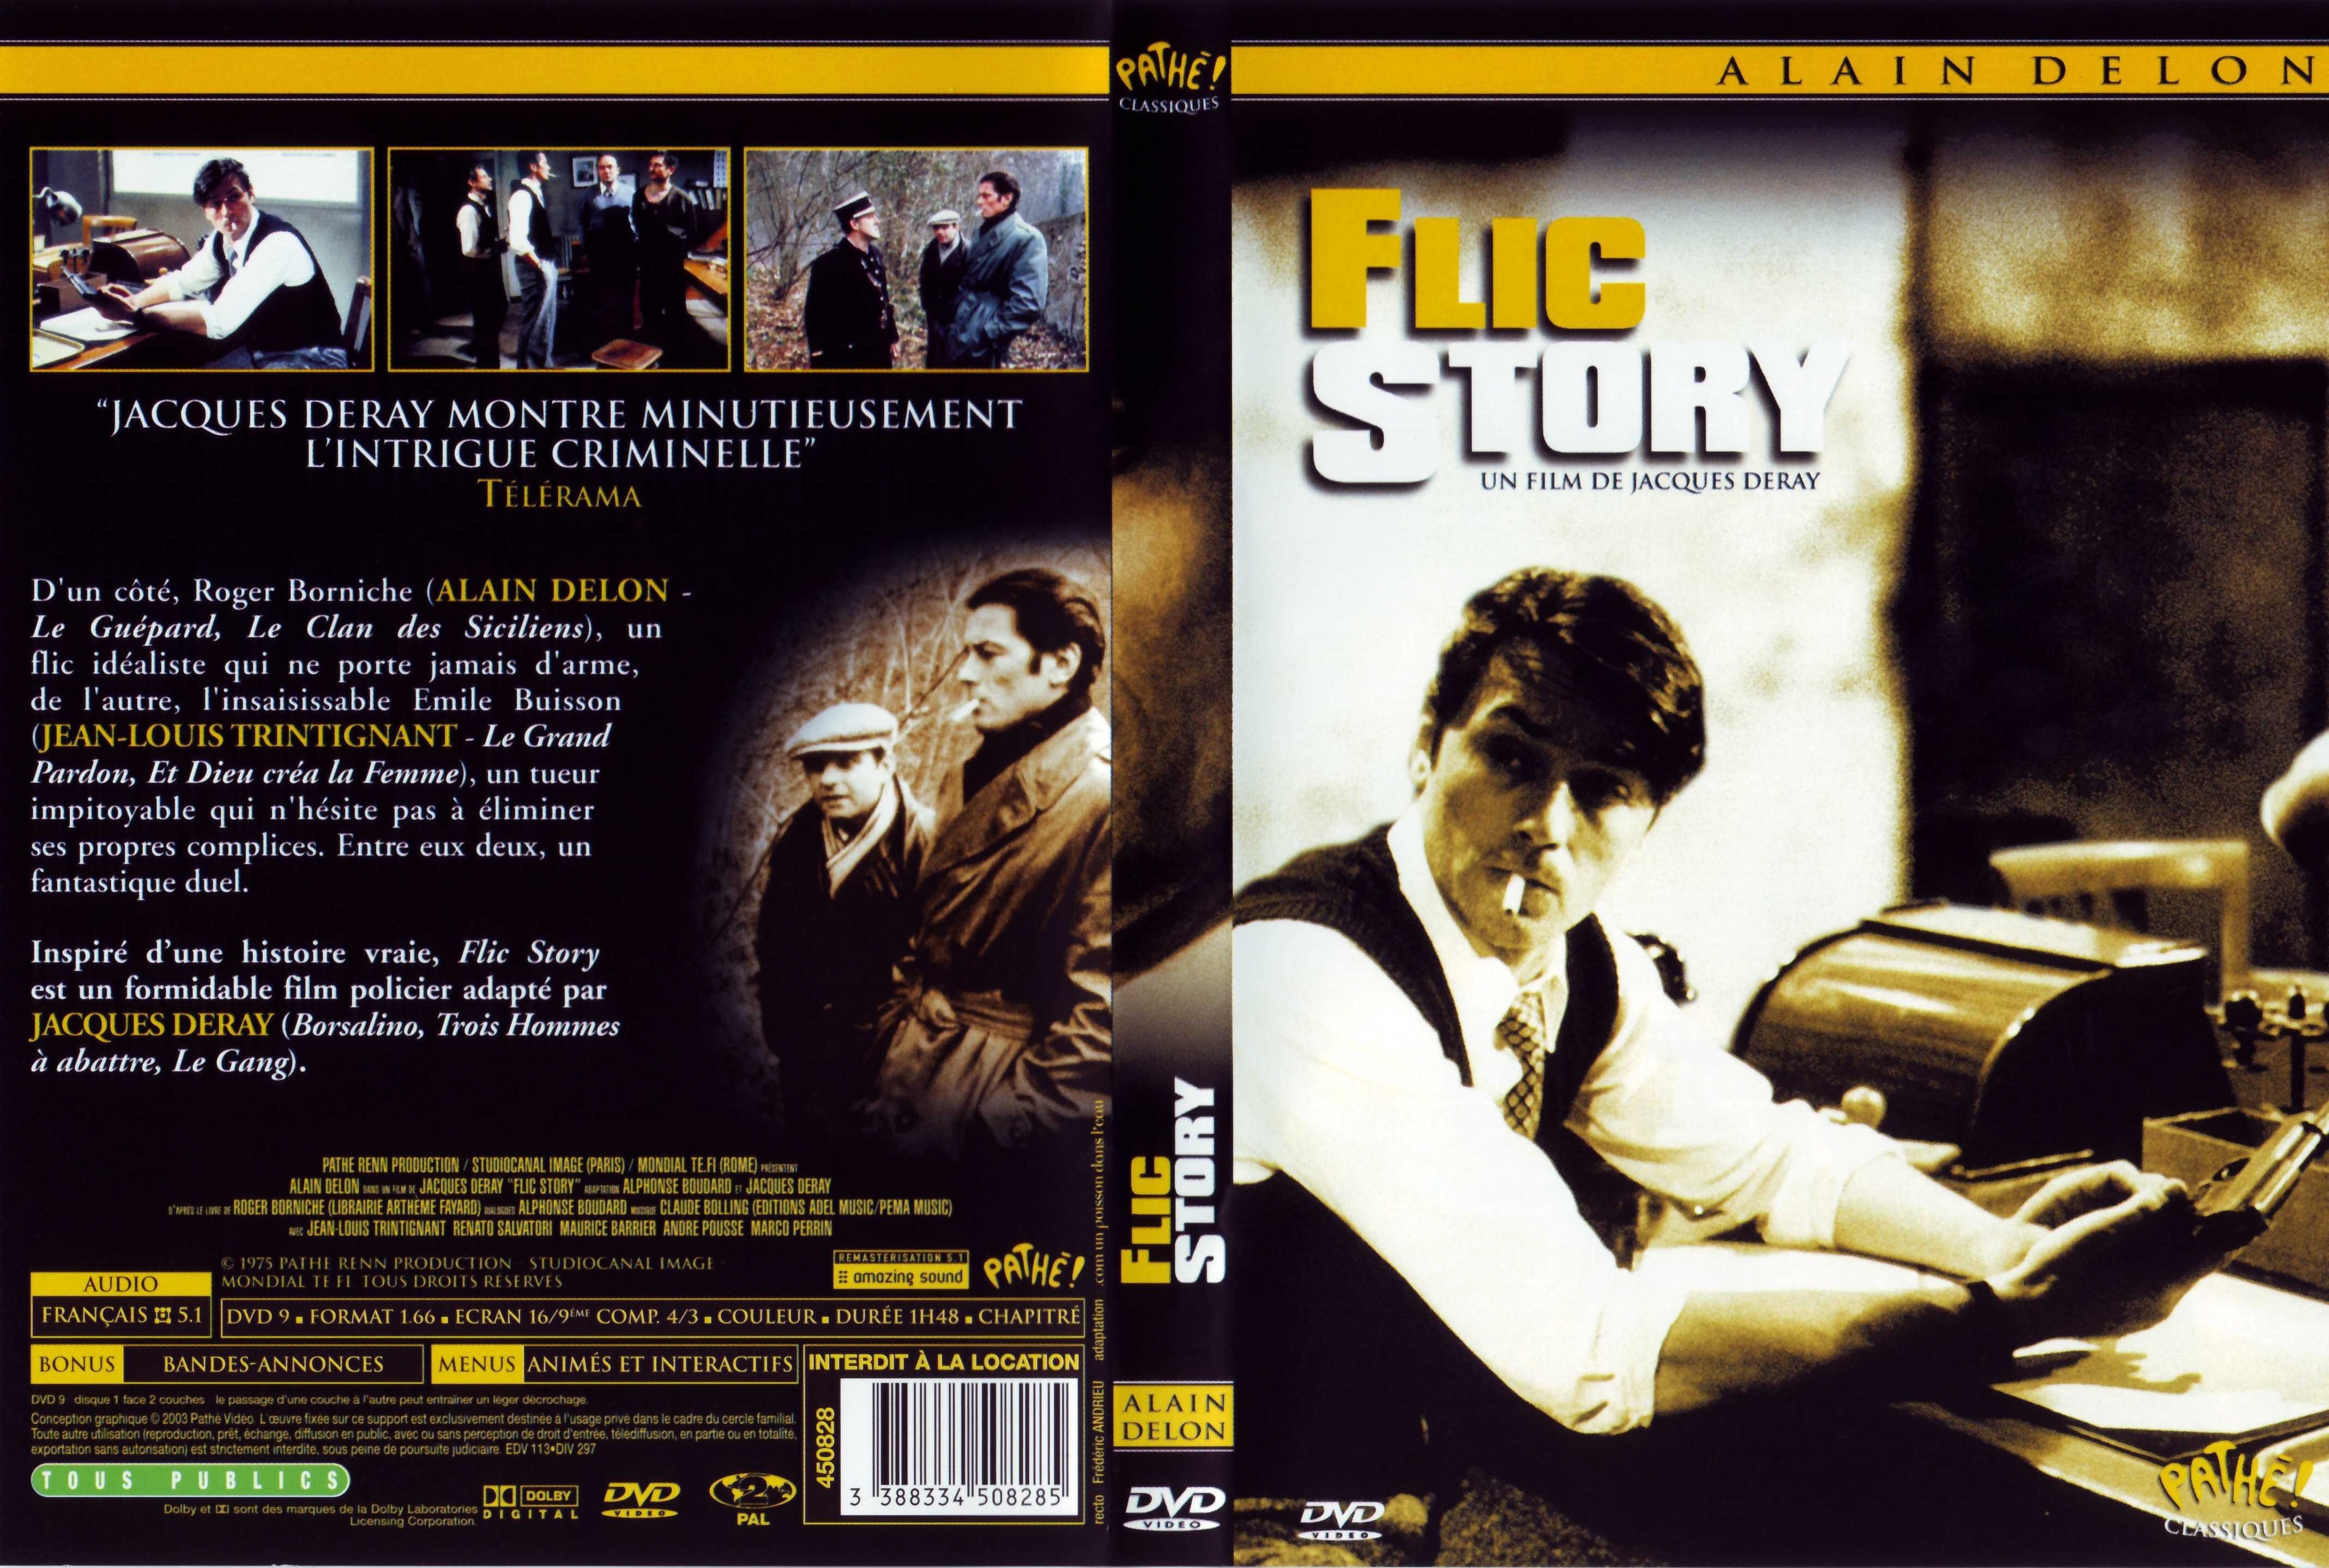 Jaquette DVD Flic story